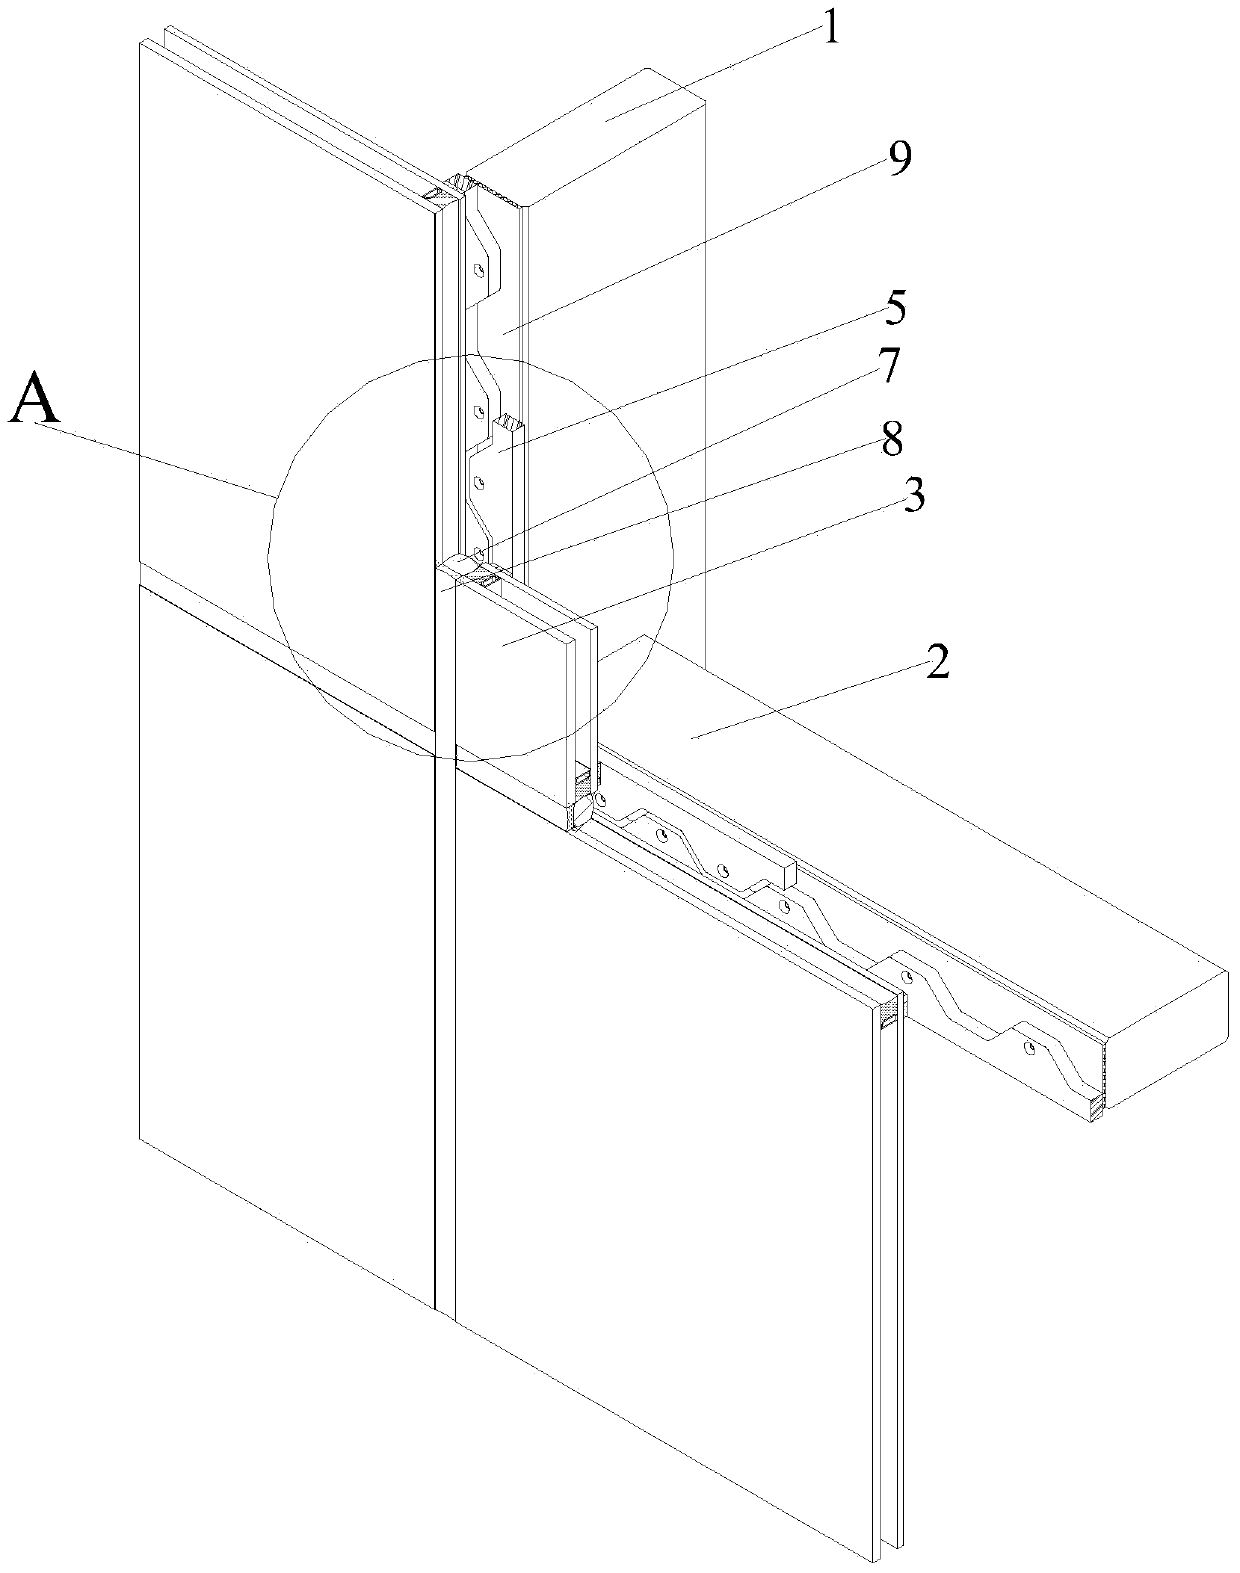 A curtain wall glass peripheral structure